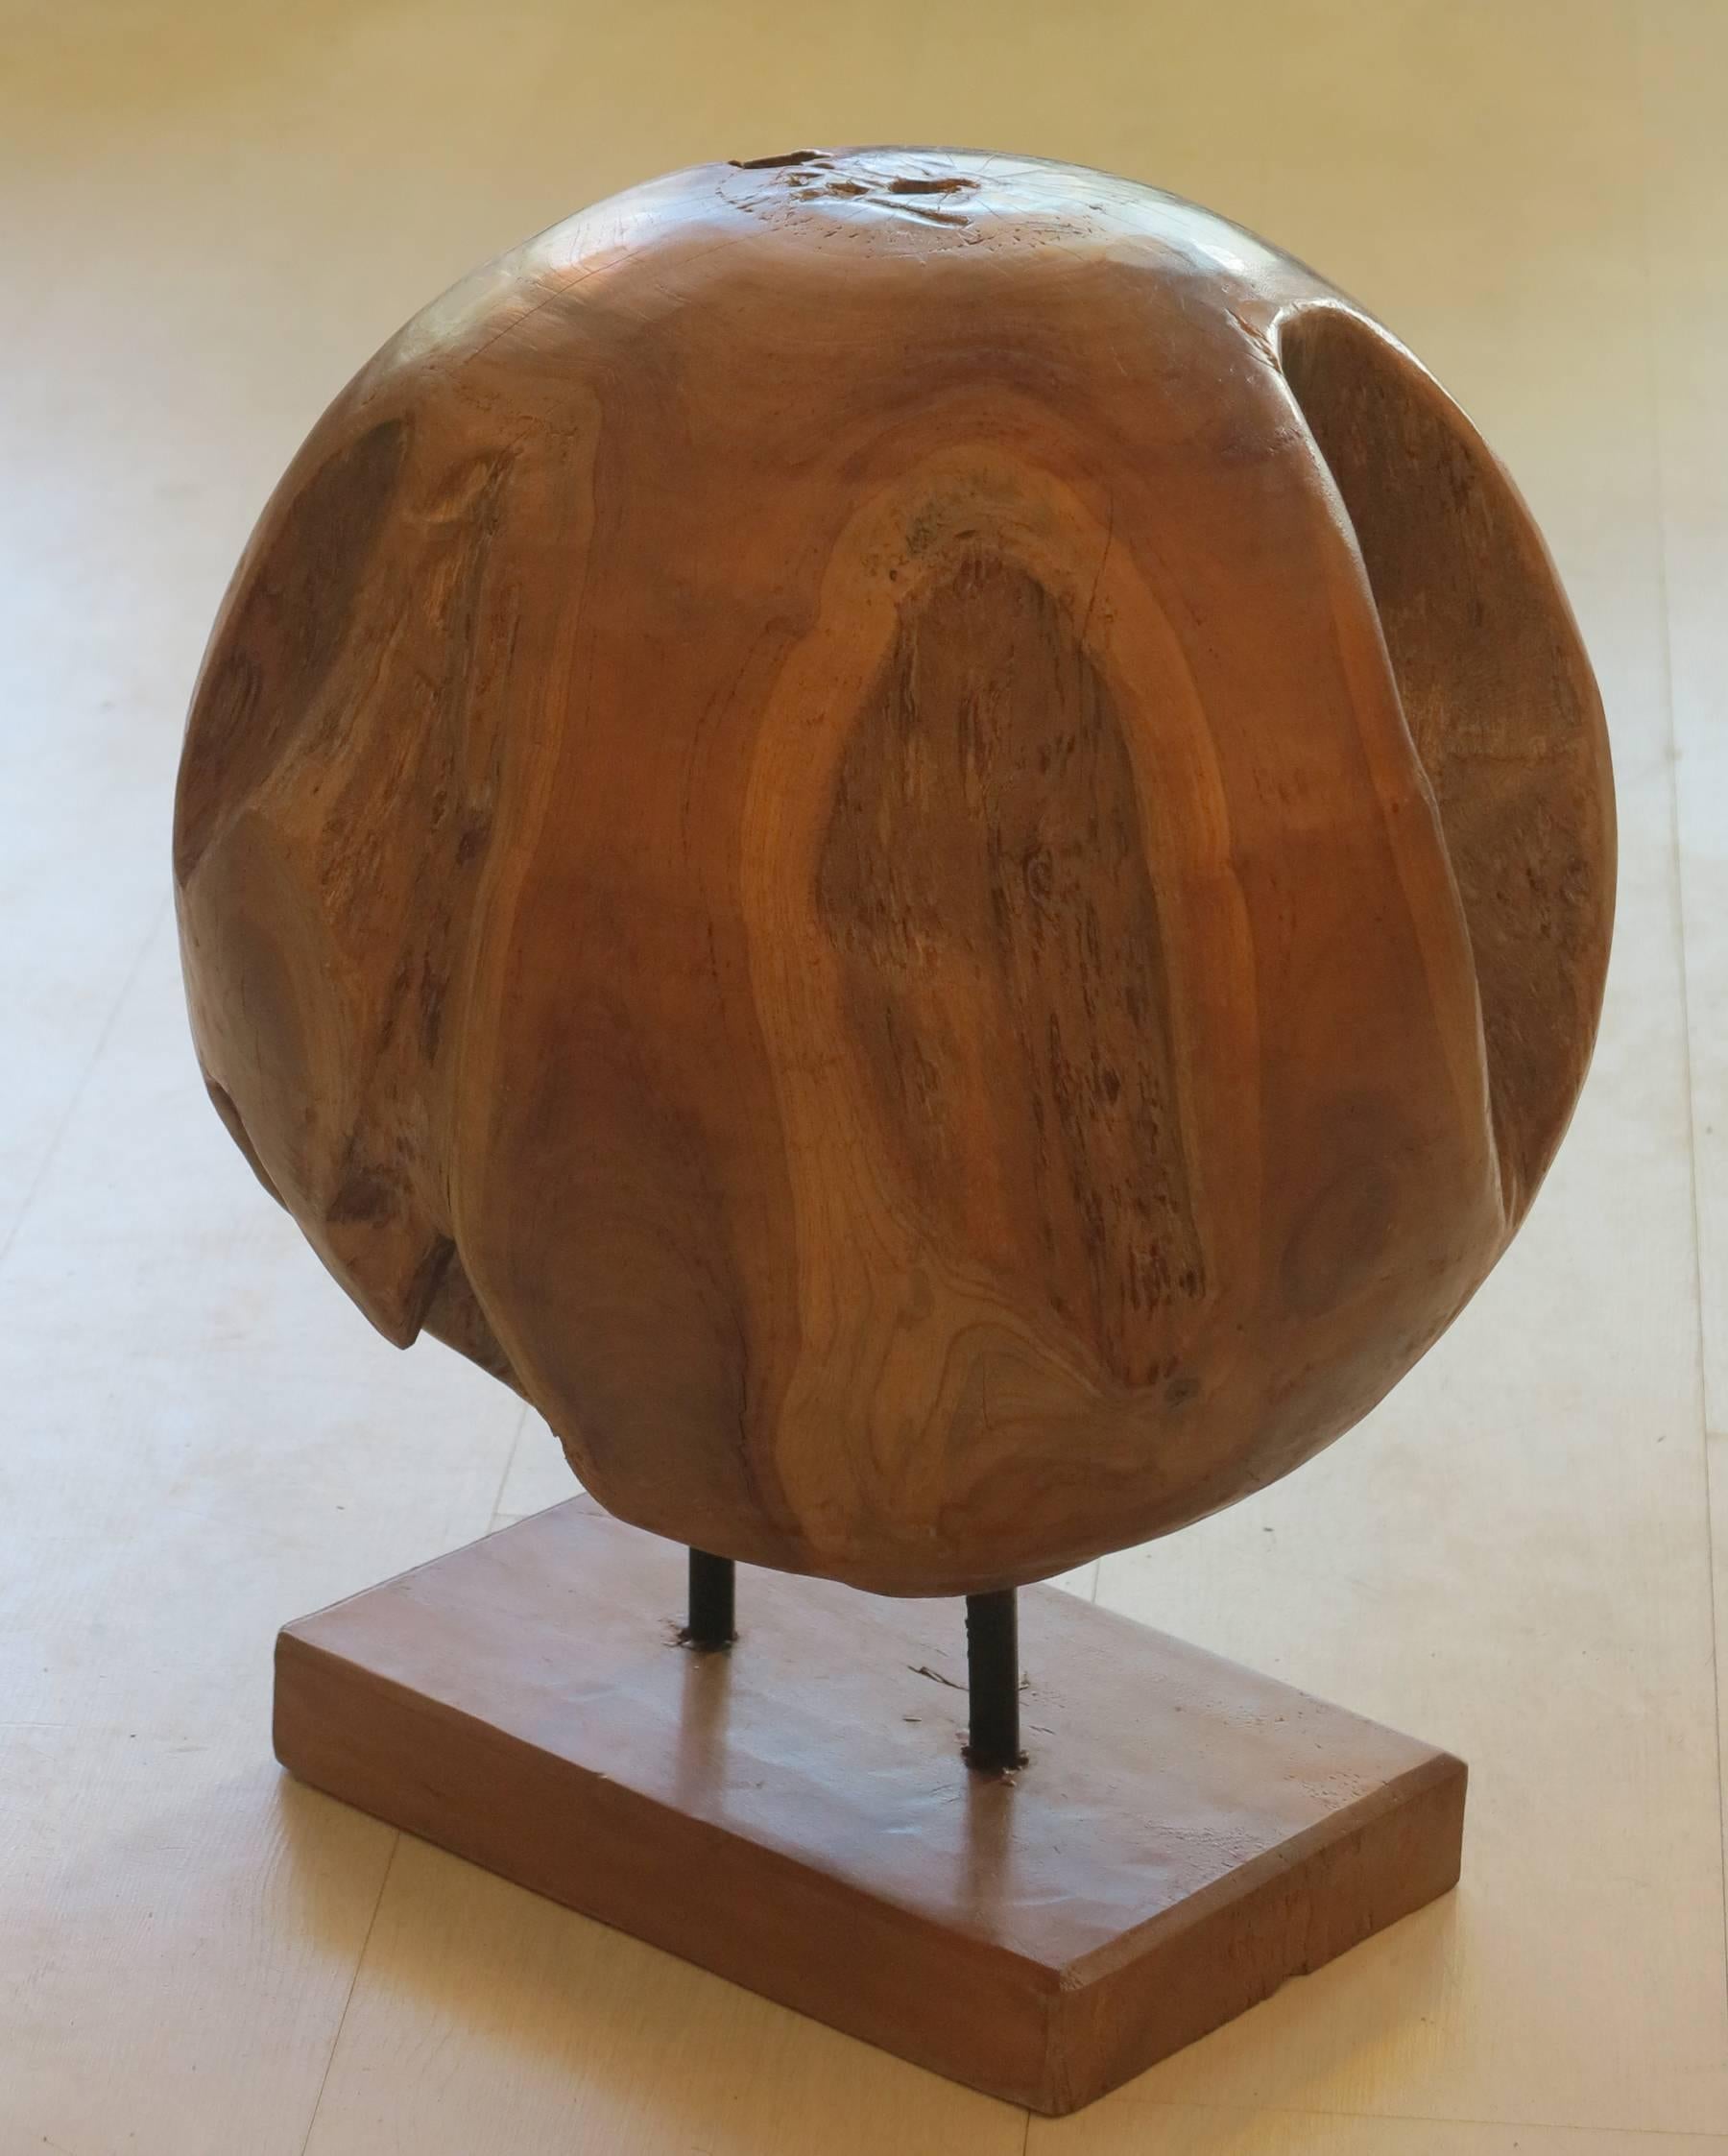 Vintage wooden root ball sculpture. Smoothed and finished mounted on a wooden base. Large and impressive piece. 20 inches high with a 15 inch diameter.